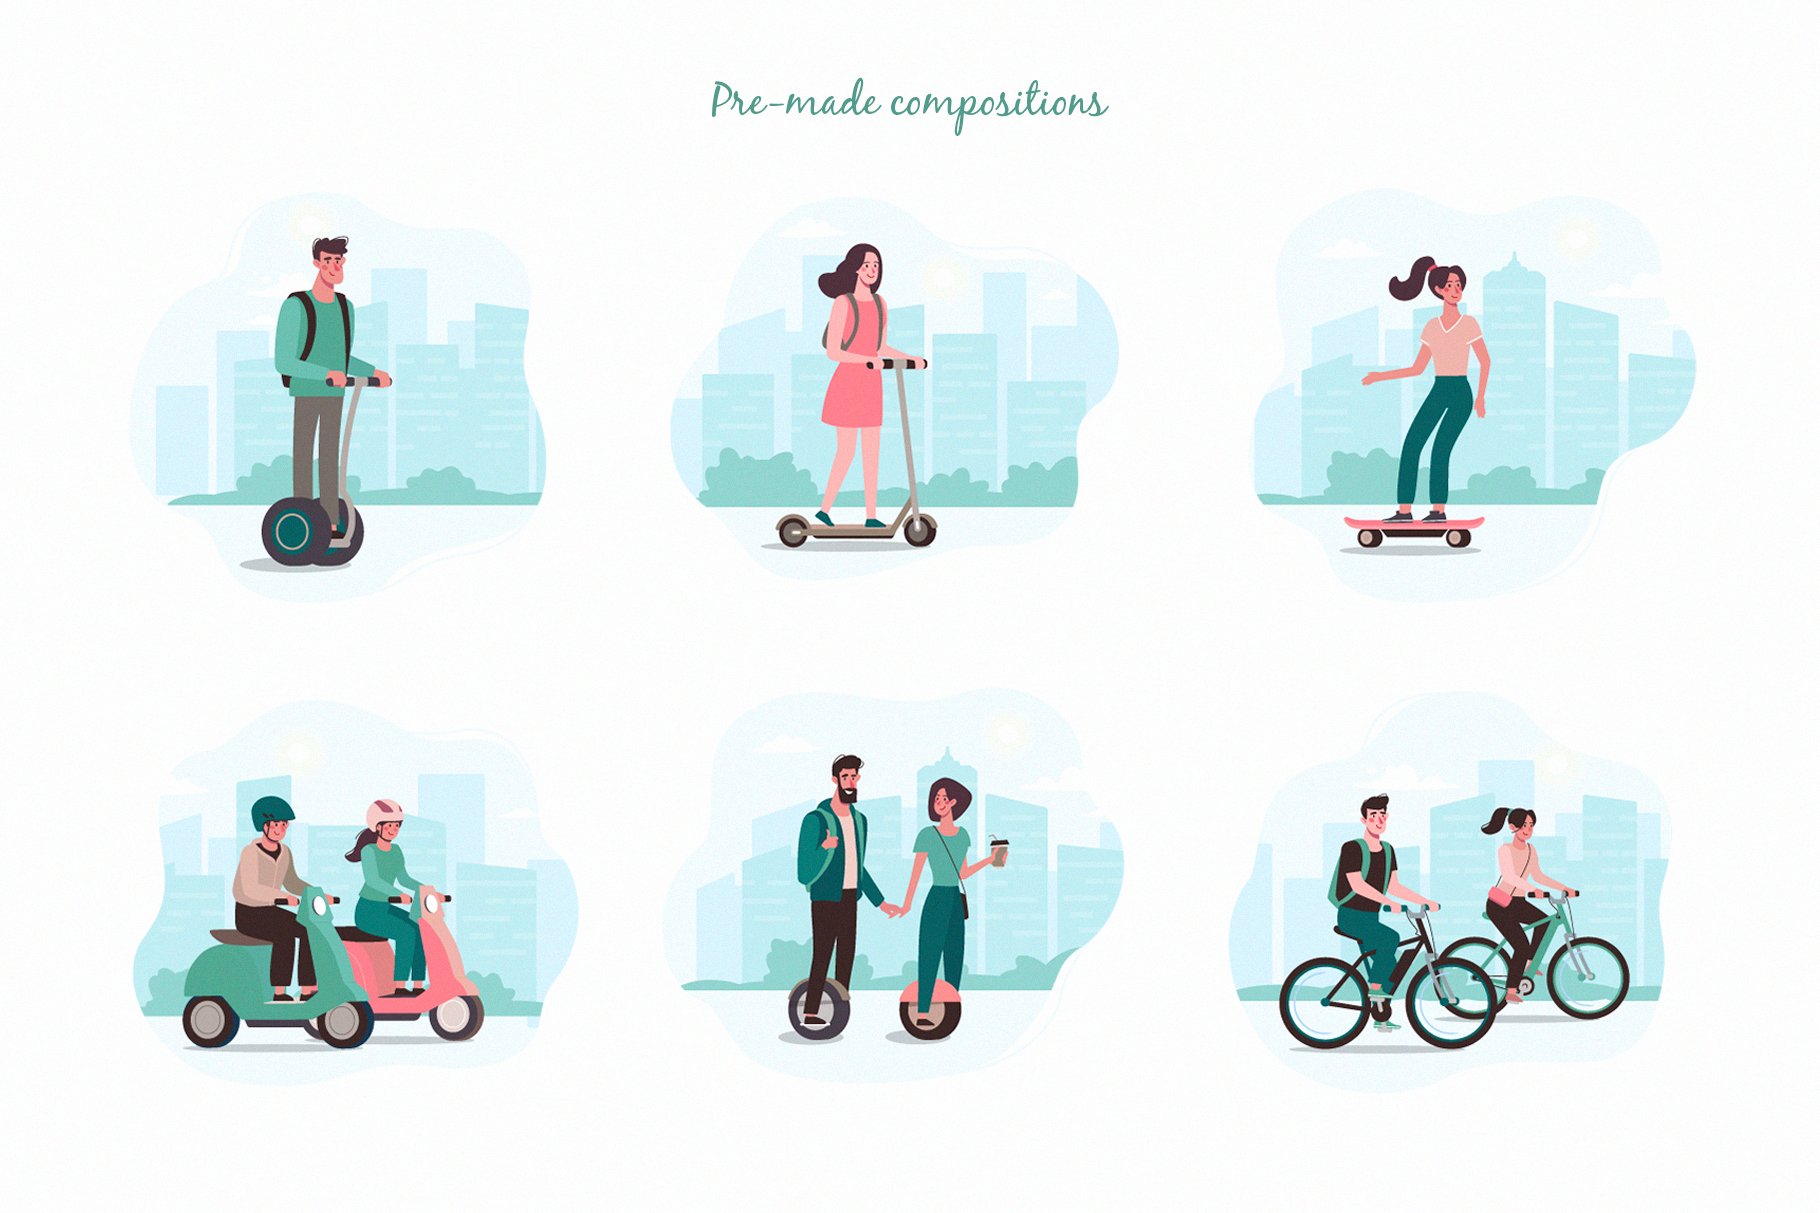 Some ready compositions with people and their bicycles.